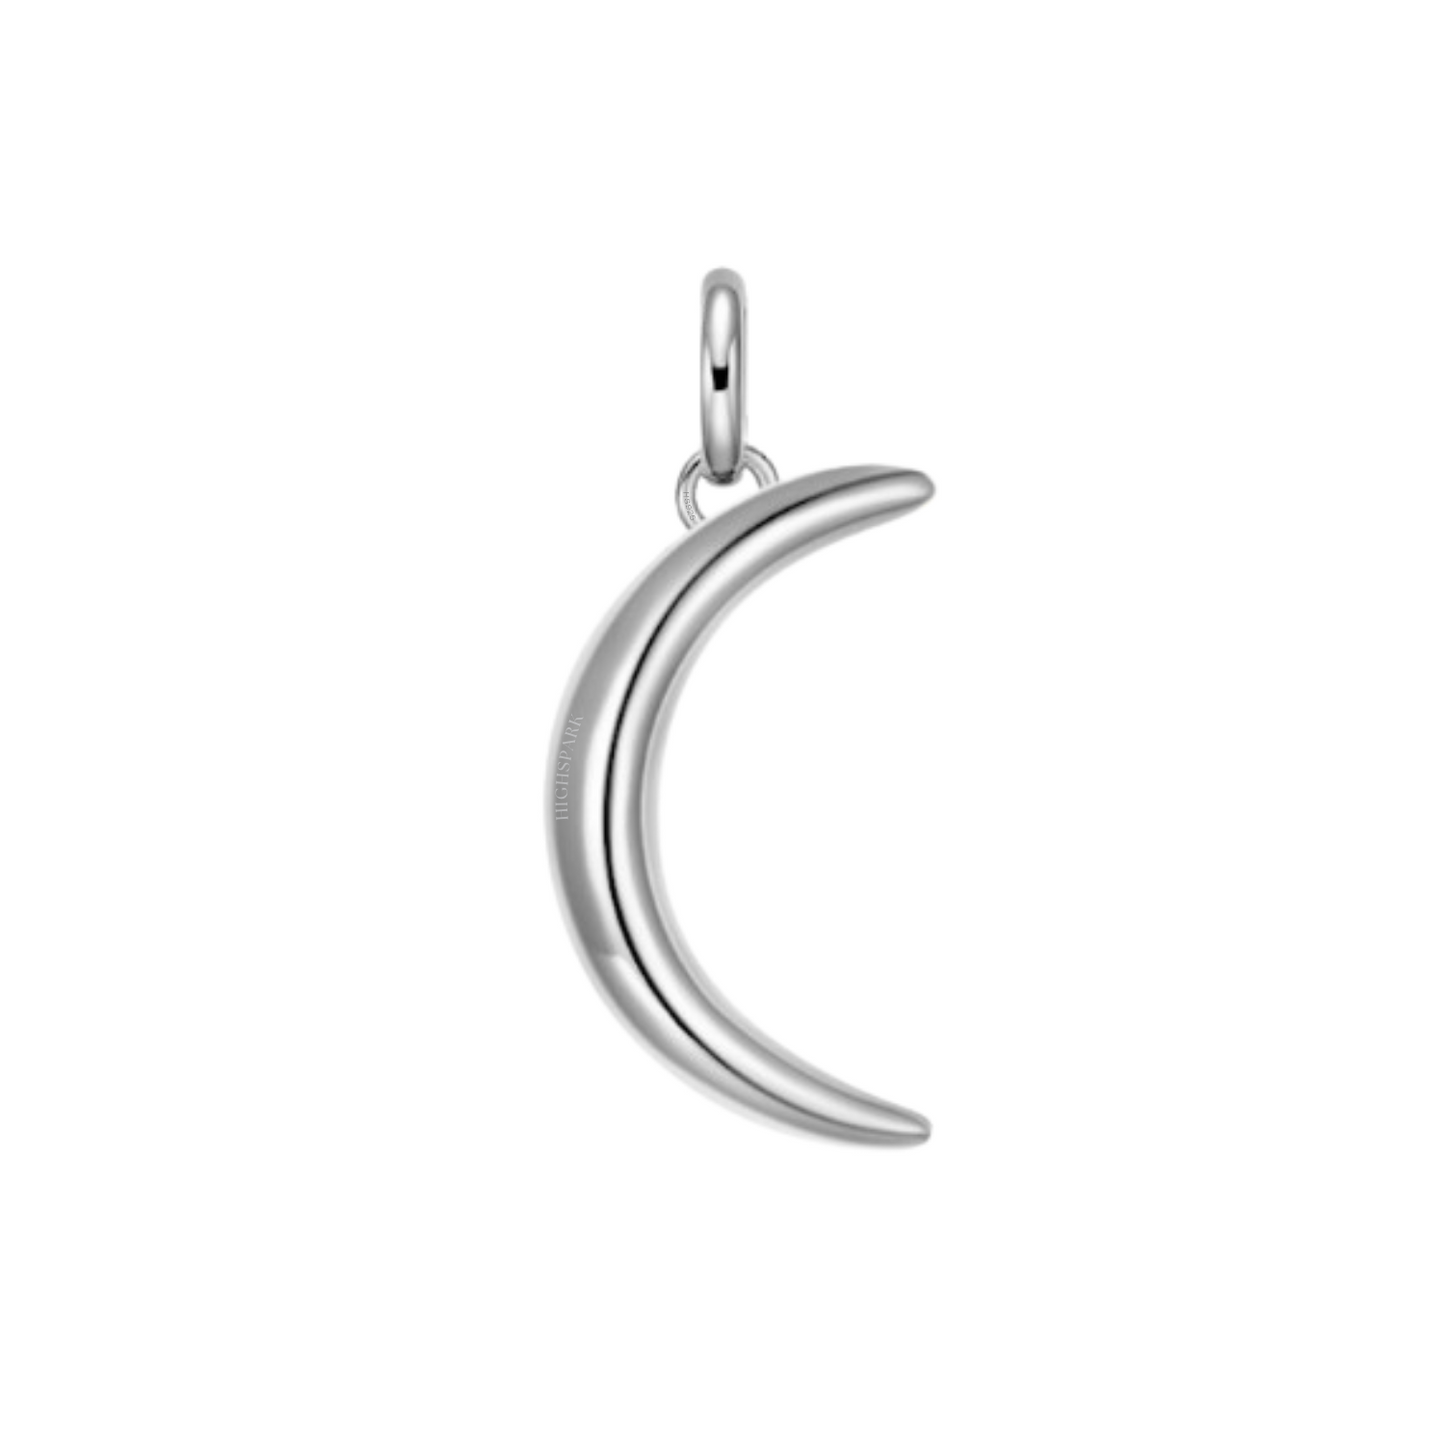 Crescent Moon Pendant Necklace in 92.5 Silver